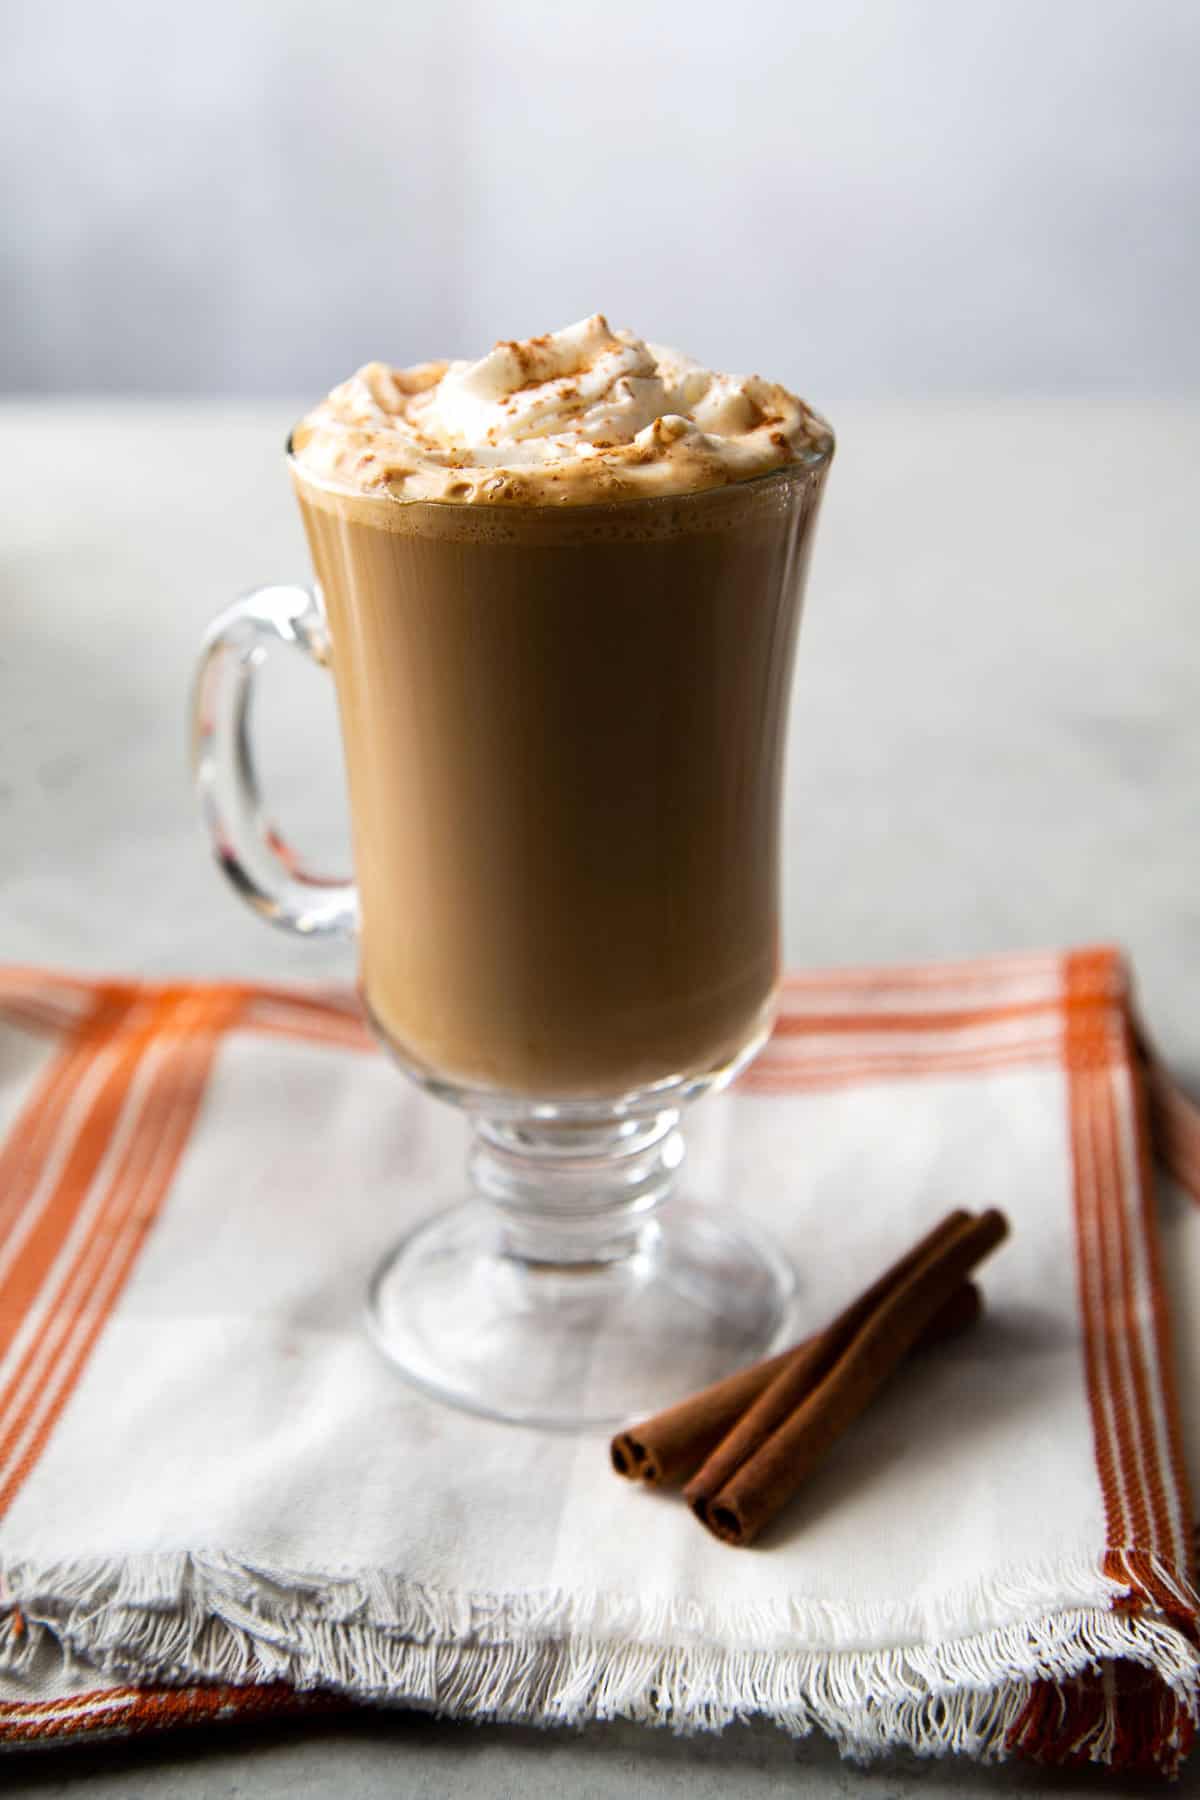 Dolce and Soy - Nespresso Recipes